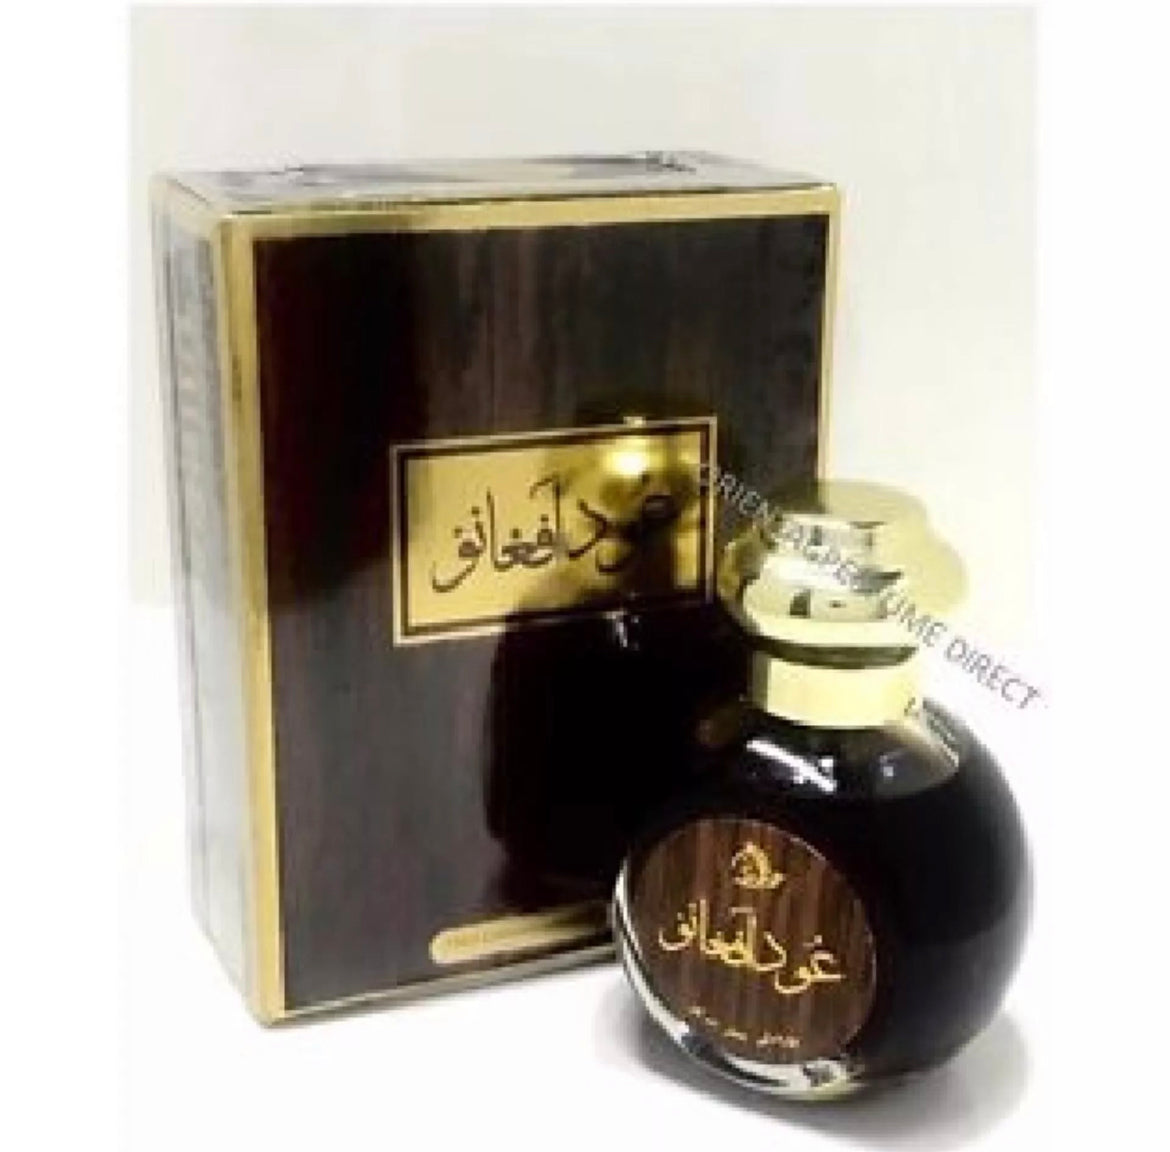 Afghano Concentrated Perfume Oil from Dubai